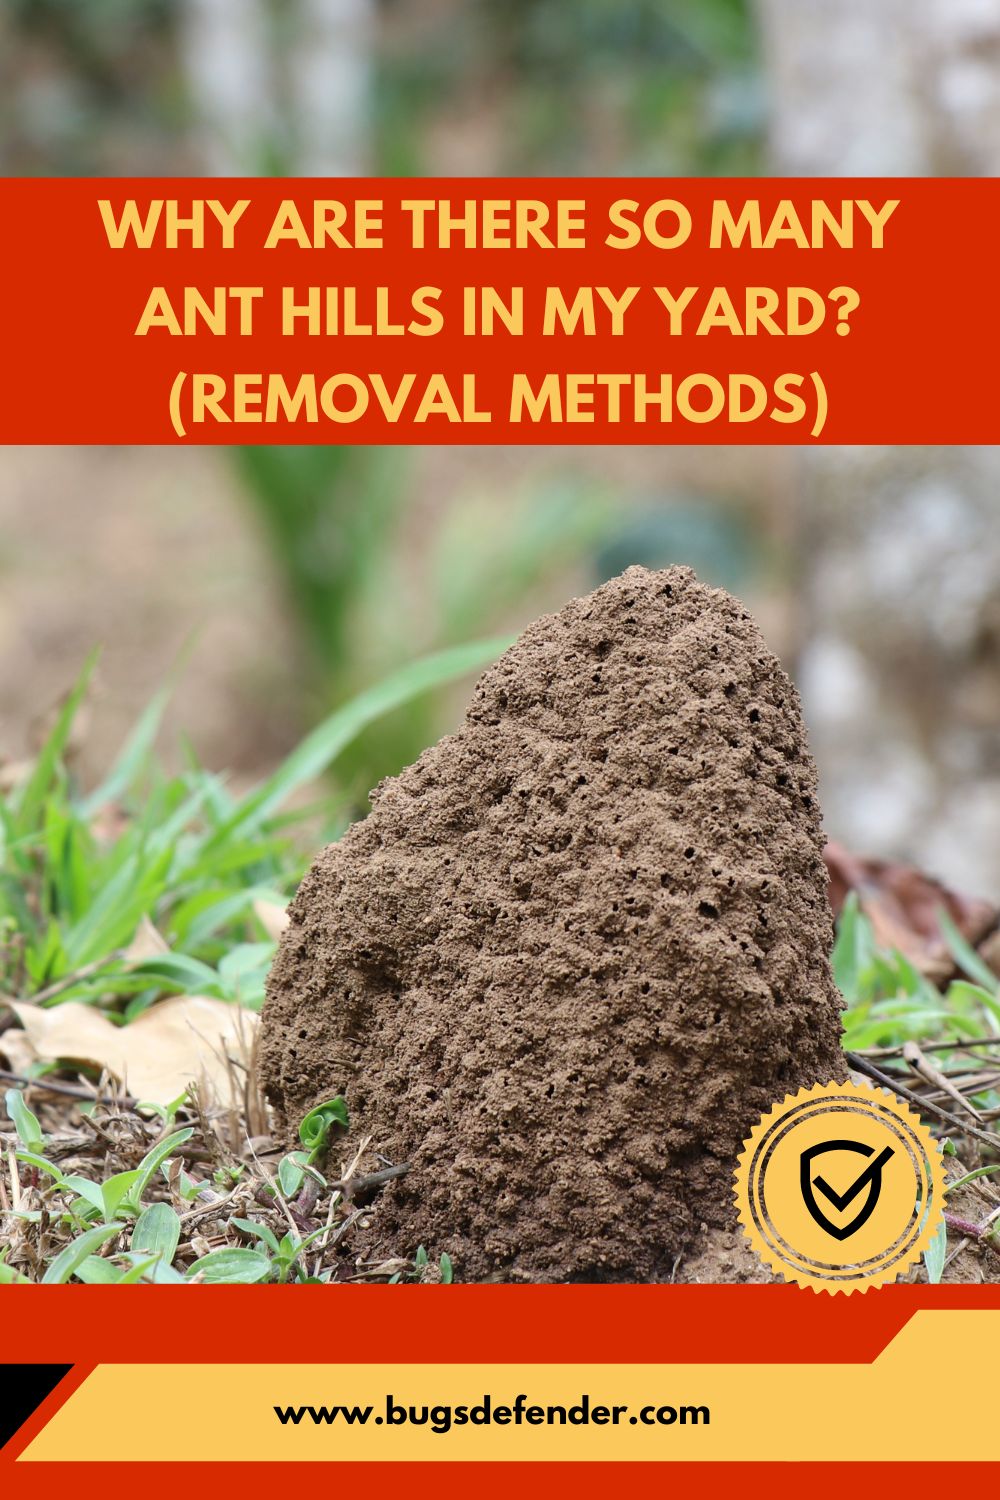 Why Are There So Many Ant Hills in My Yard? (Removal Methods) pin2